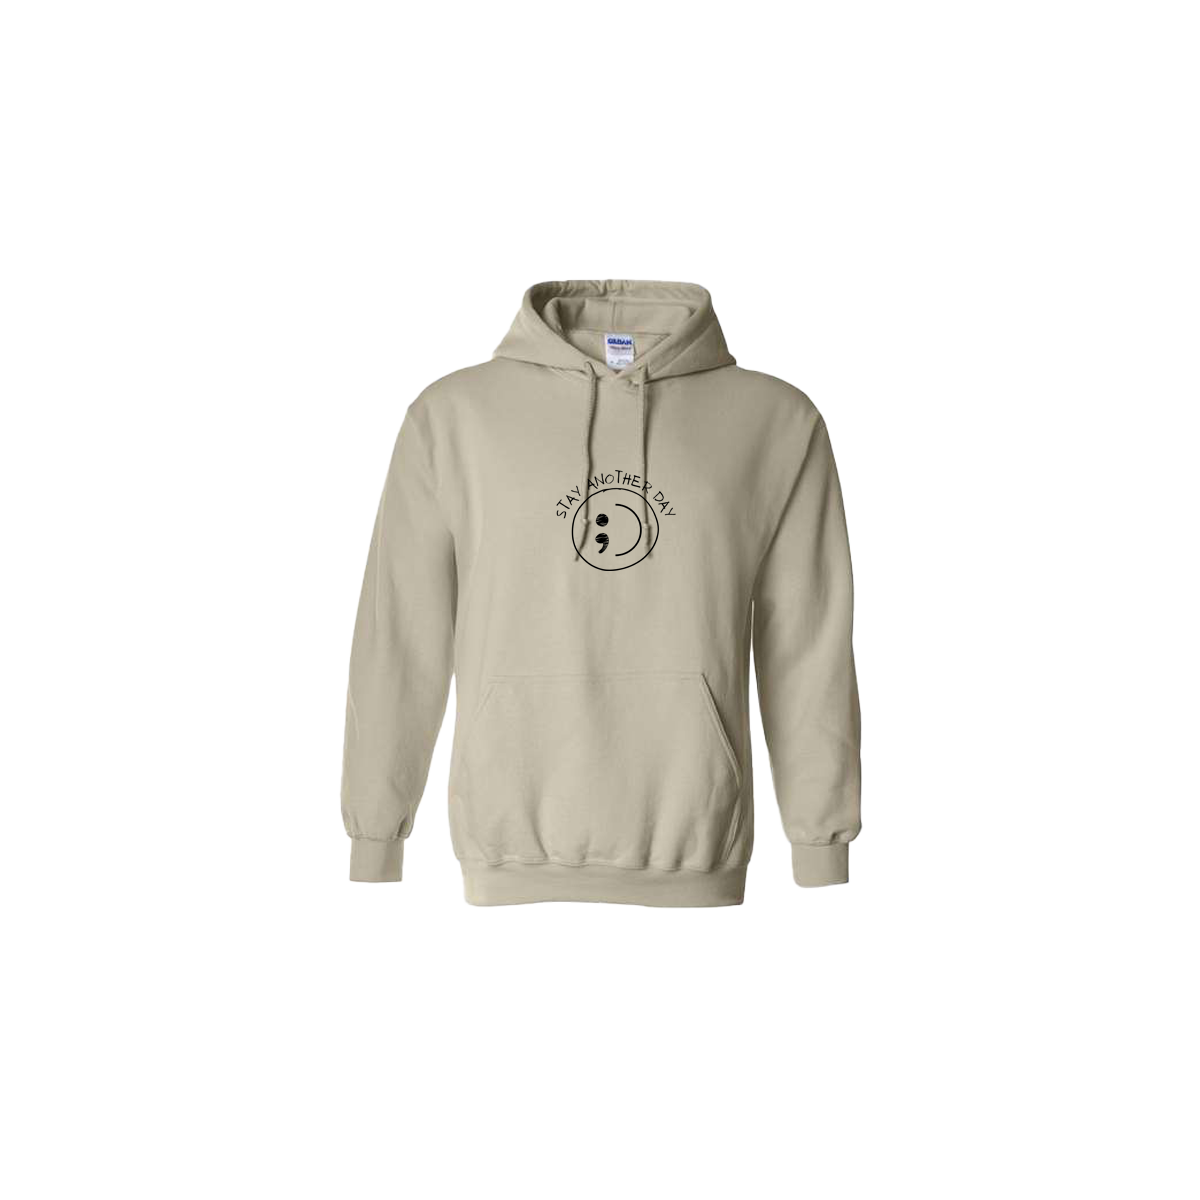 Stay Another Day Smiley Face Embroidered Beige Hoodie - Mental Health Awareness Clothing